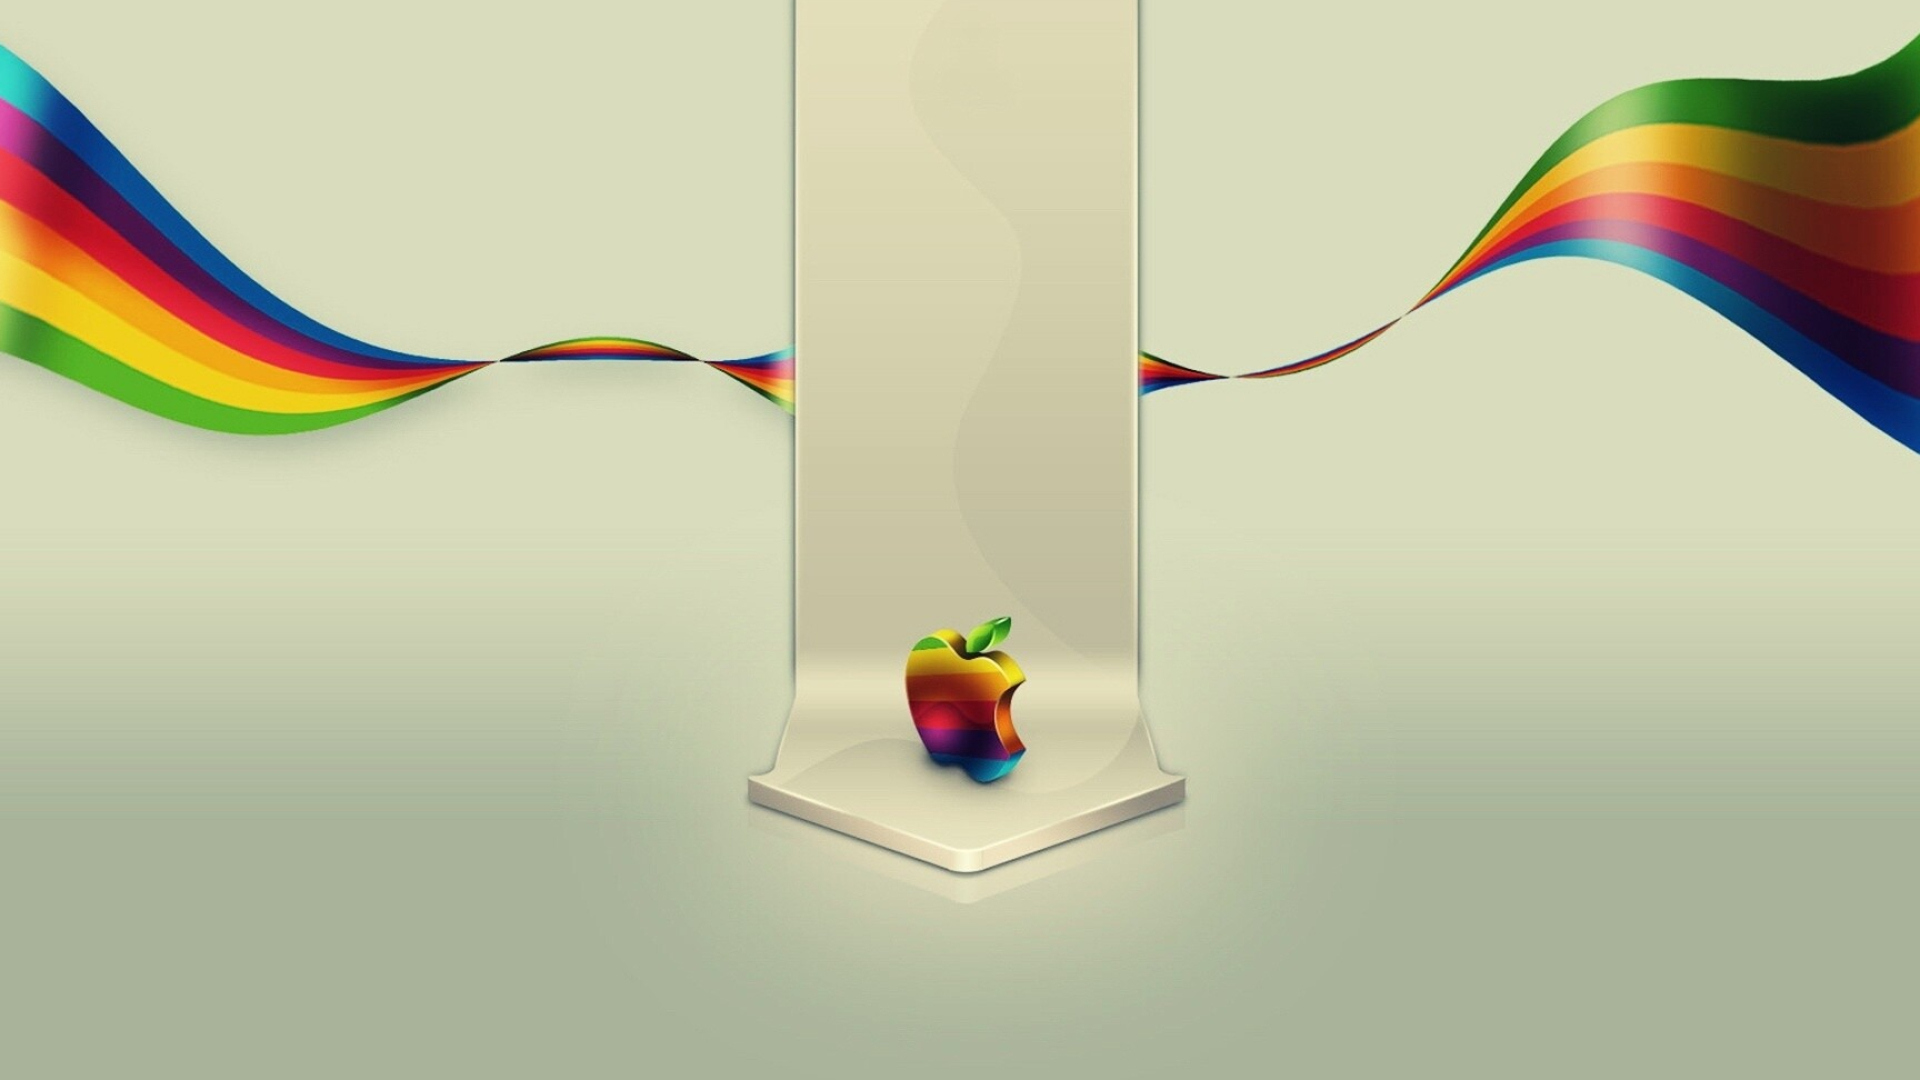 Apple Logo: Janoff's design, 2D apple with a bite taken out of it and a rainbow spectrum splashed across it. 1920x1080 Full HD Background.